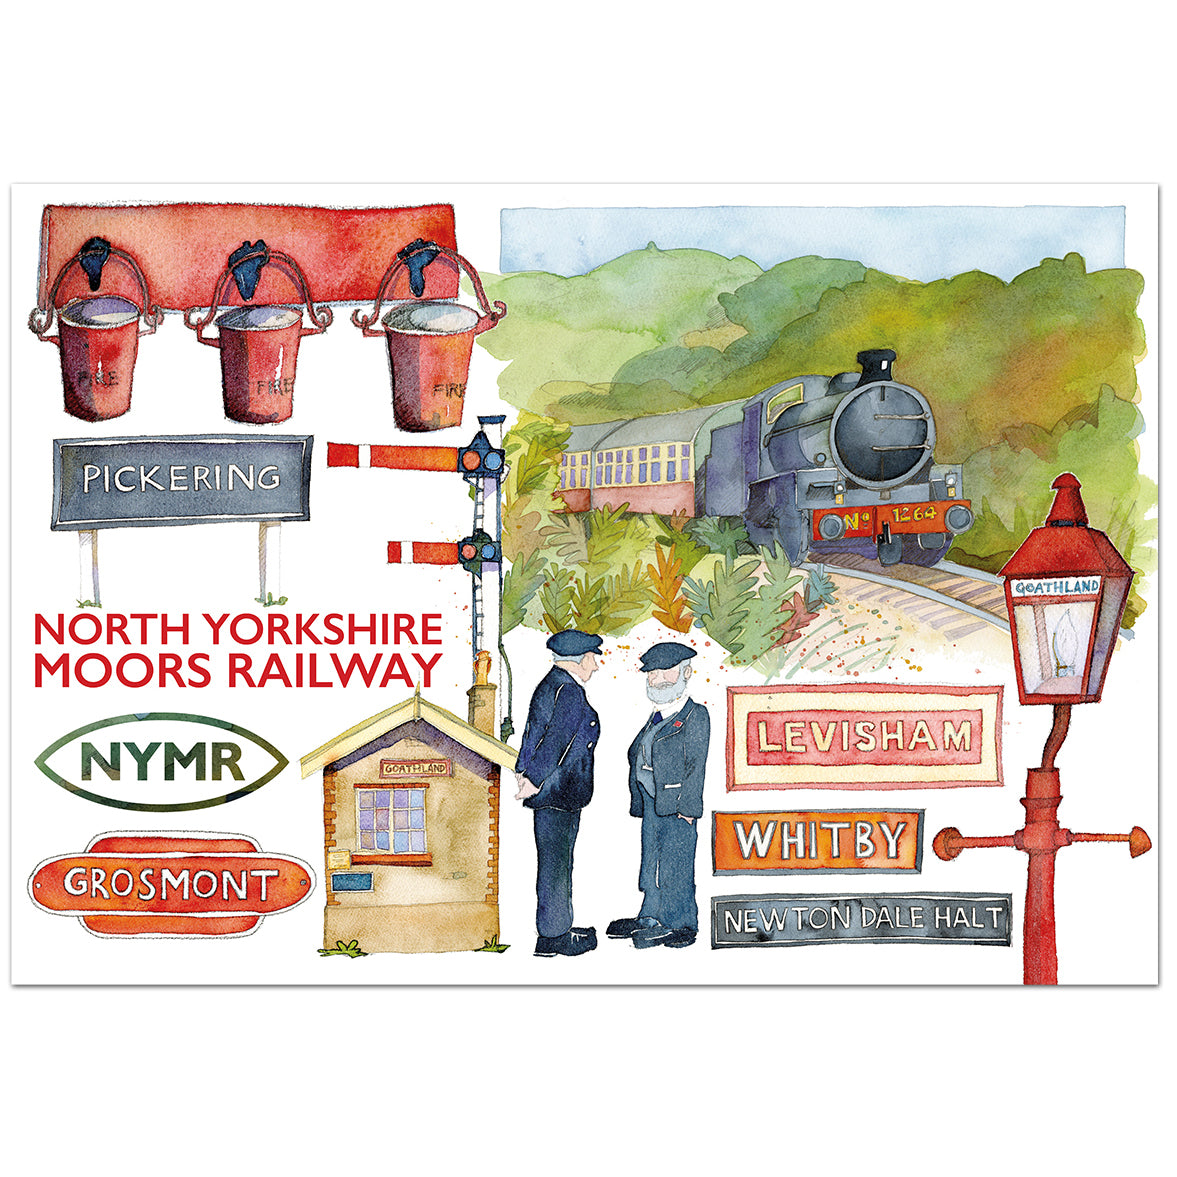 Image of finished jigsaw design with steam train and various paintings of signs, signal box, platform staff, etc.